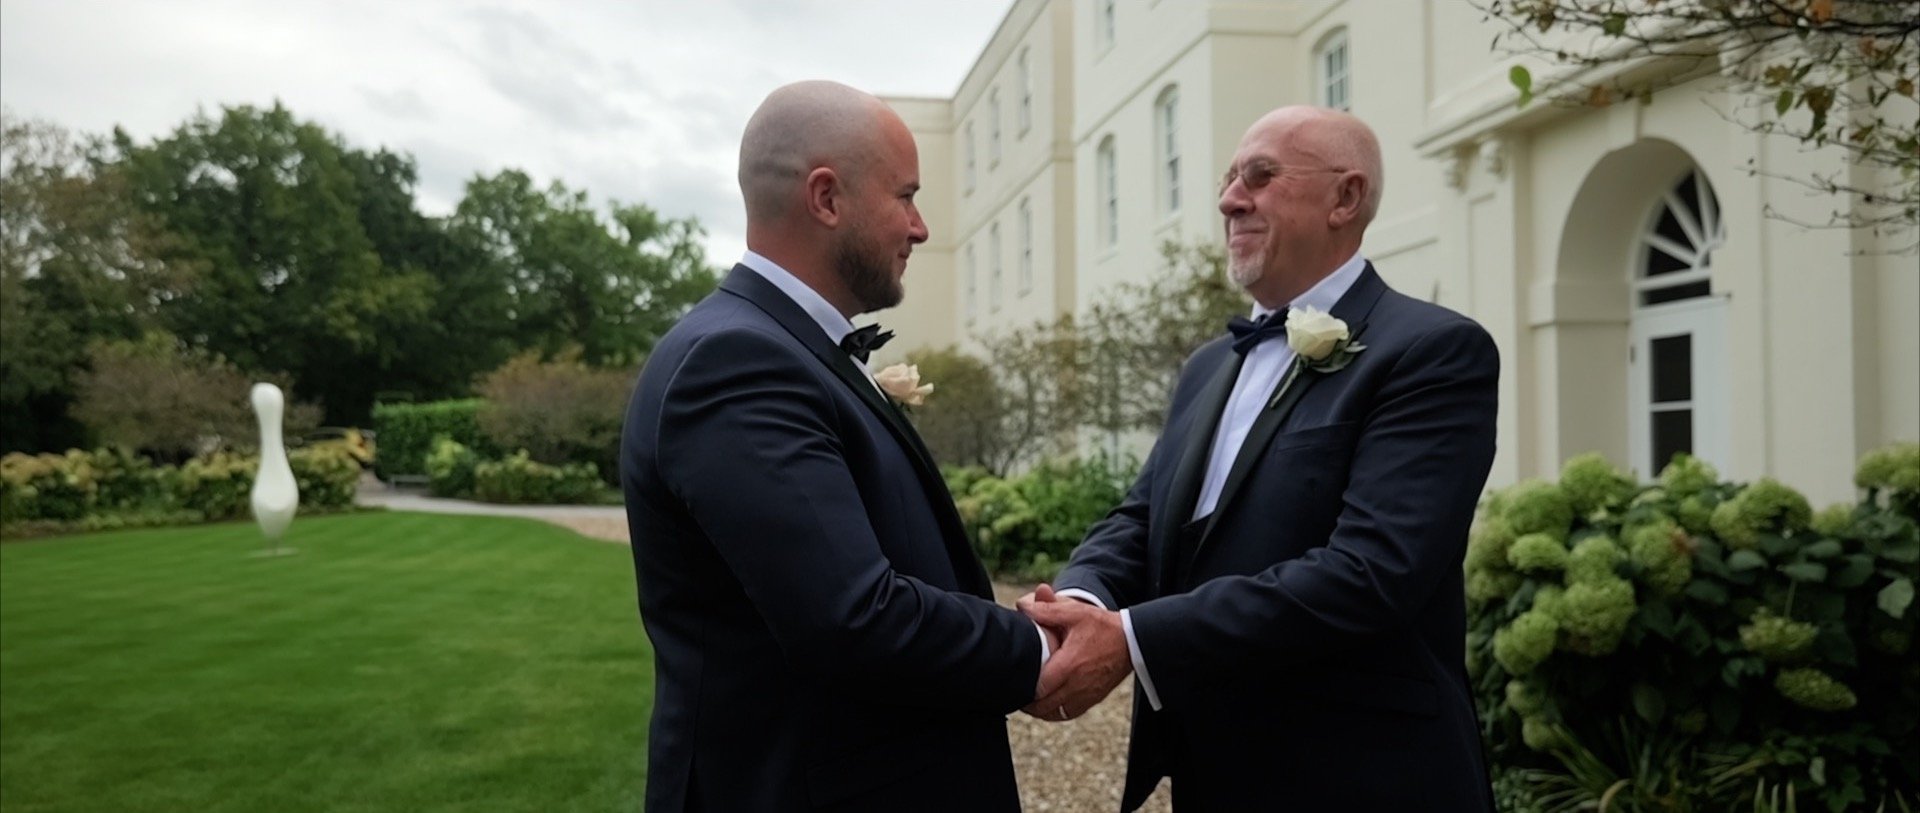 Sopwell House wedding videography - 3 Cheers Media - father and son the groom.jpg